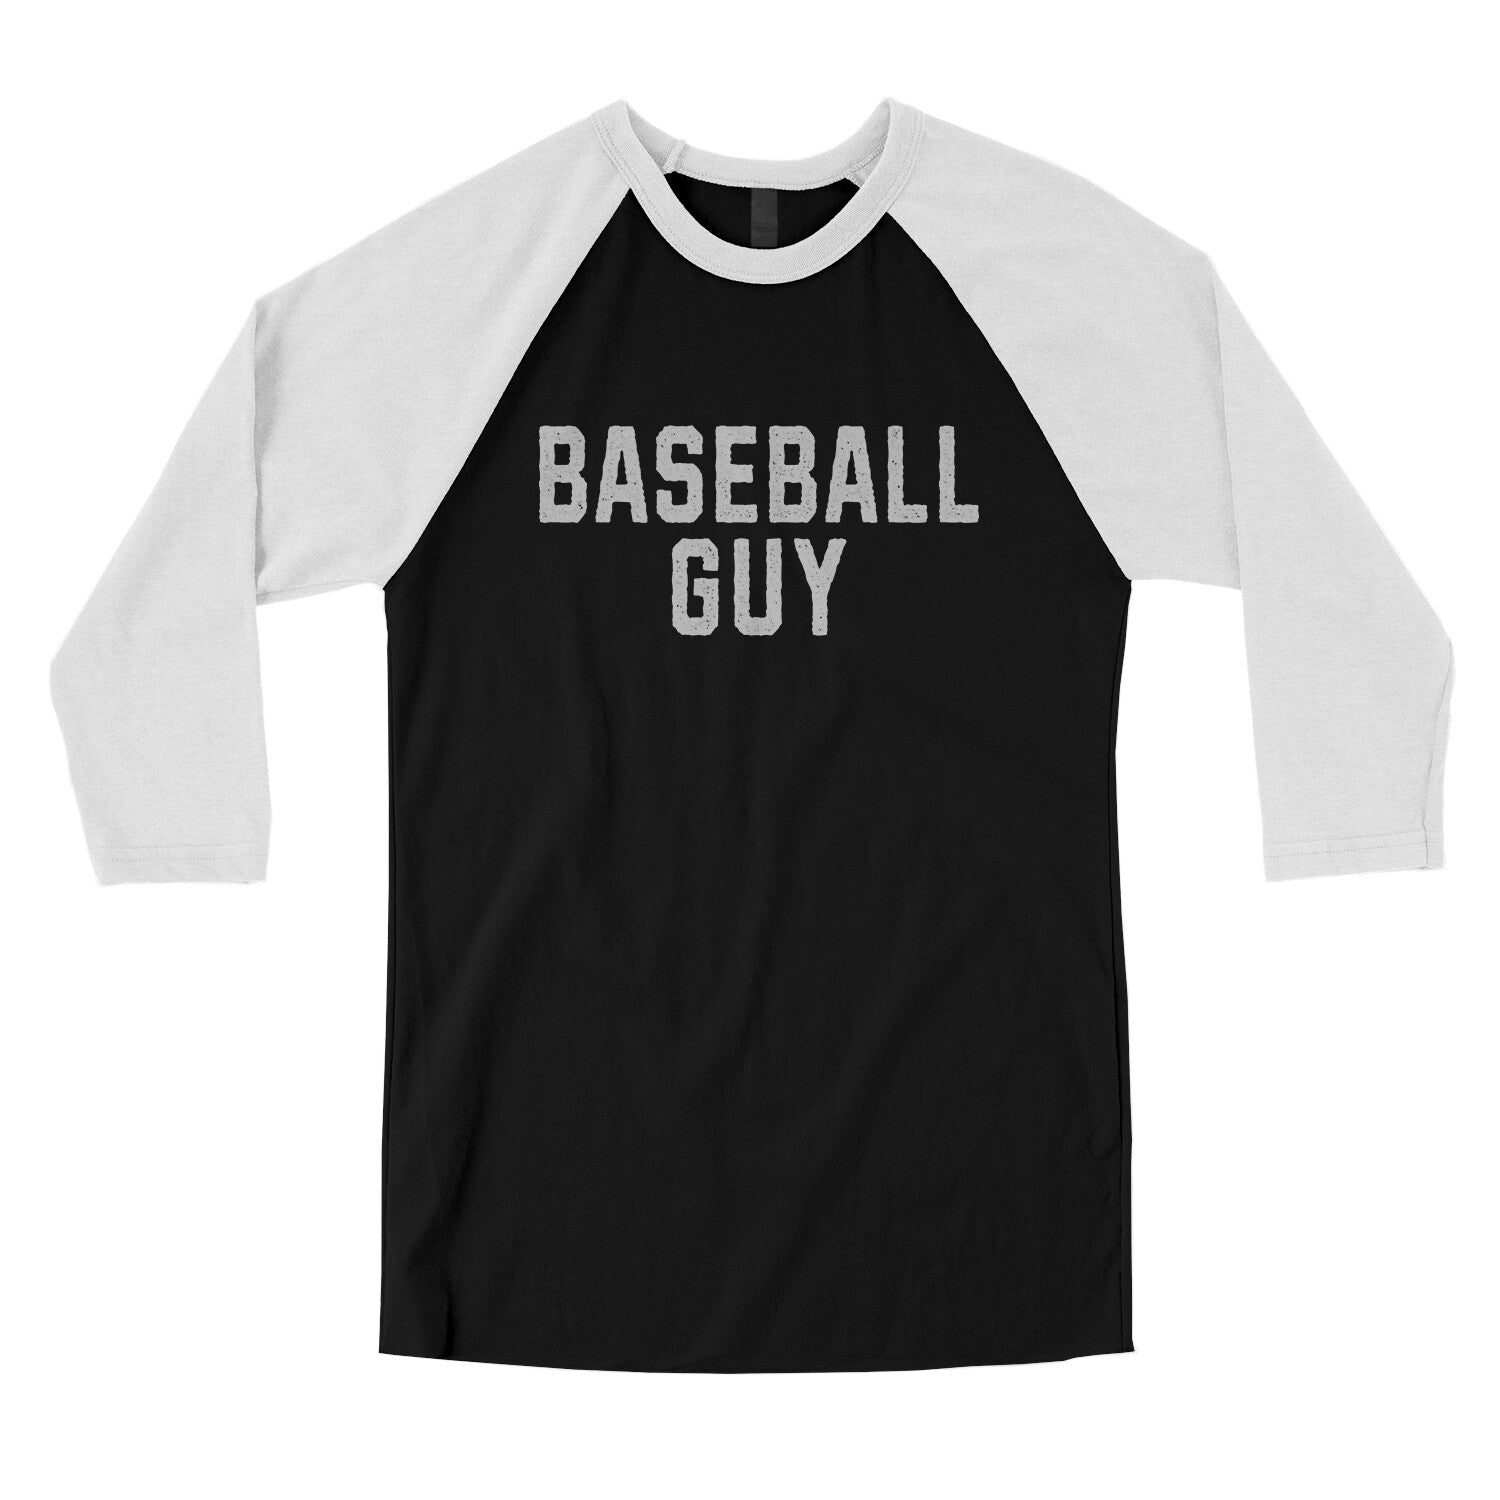 Baseball Guy in Black with White Color